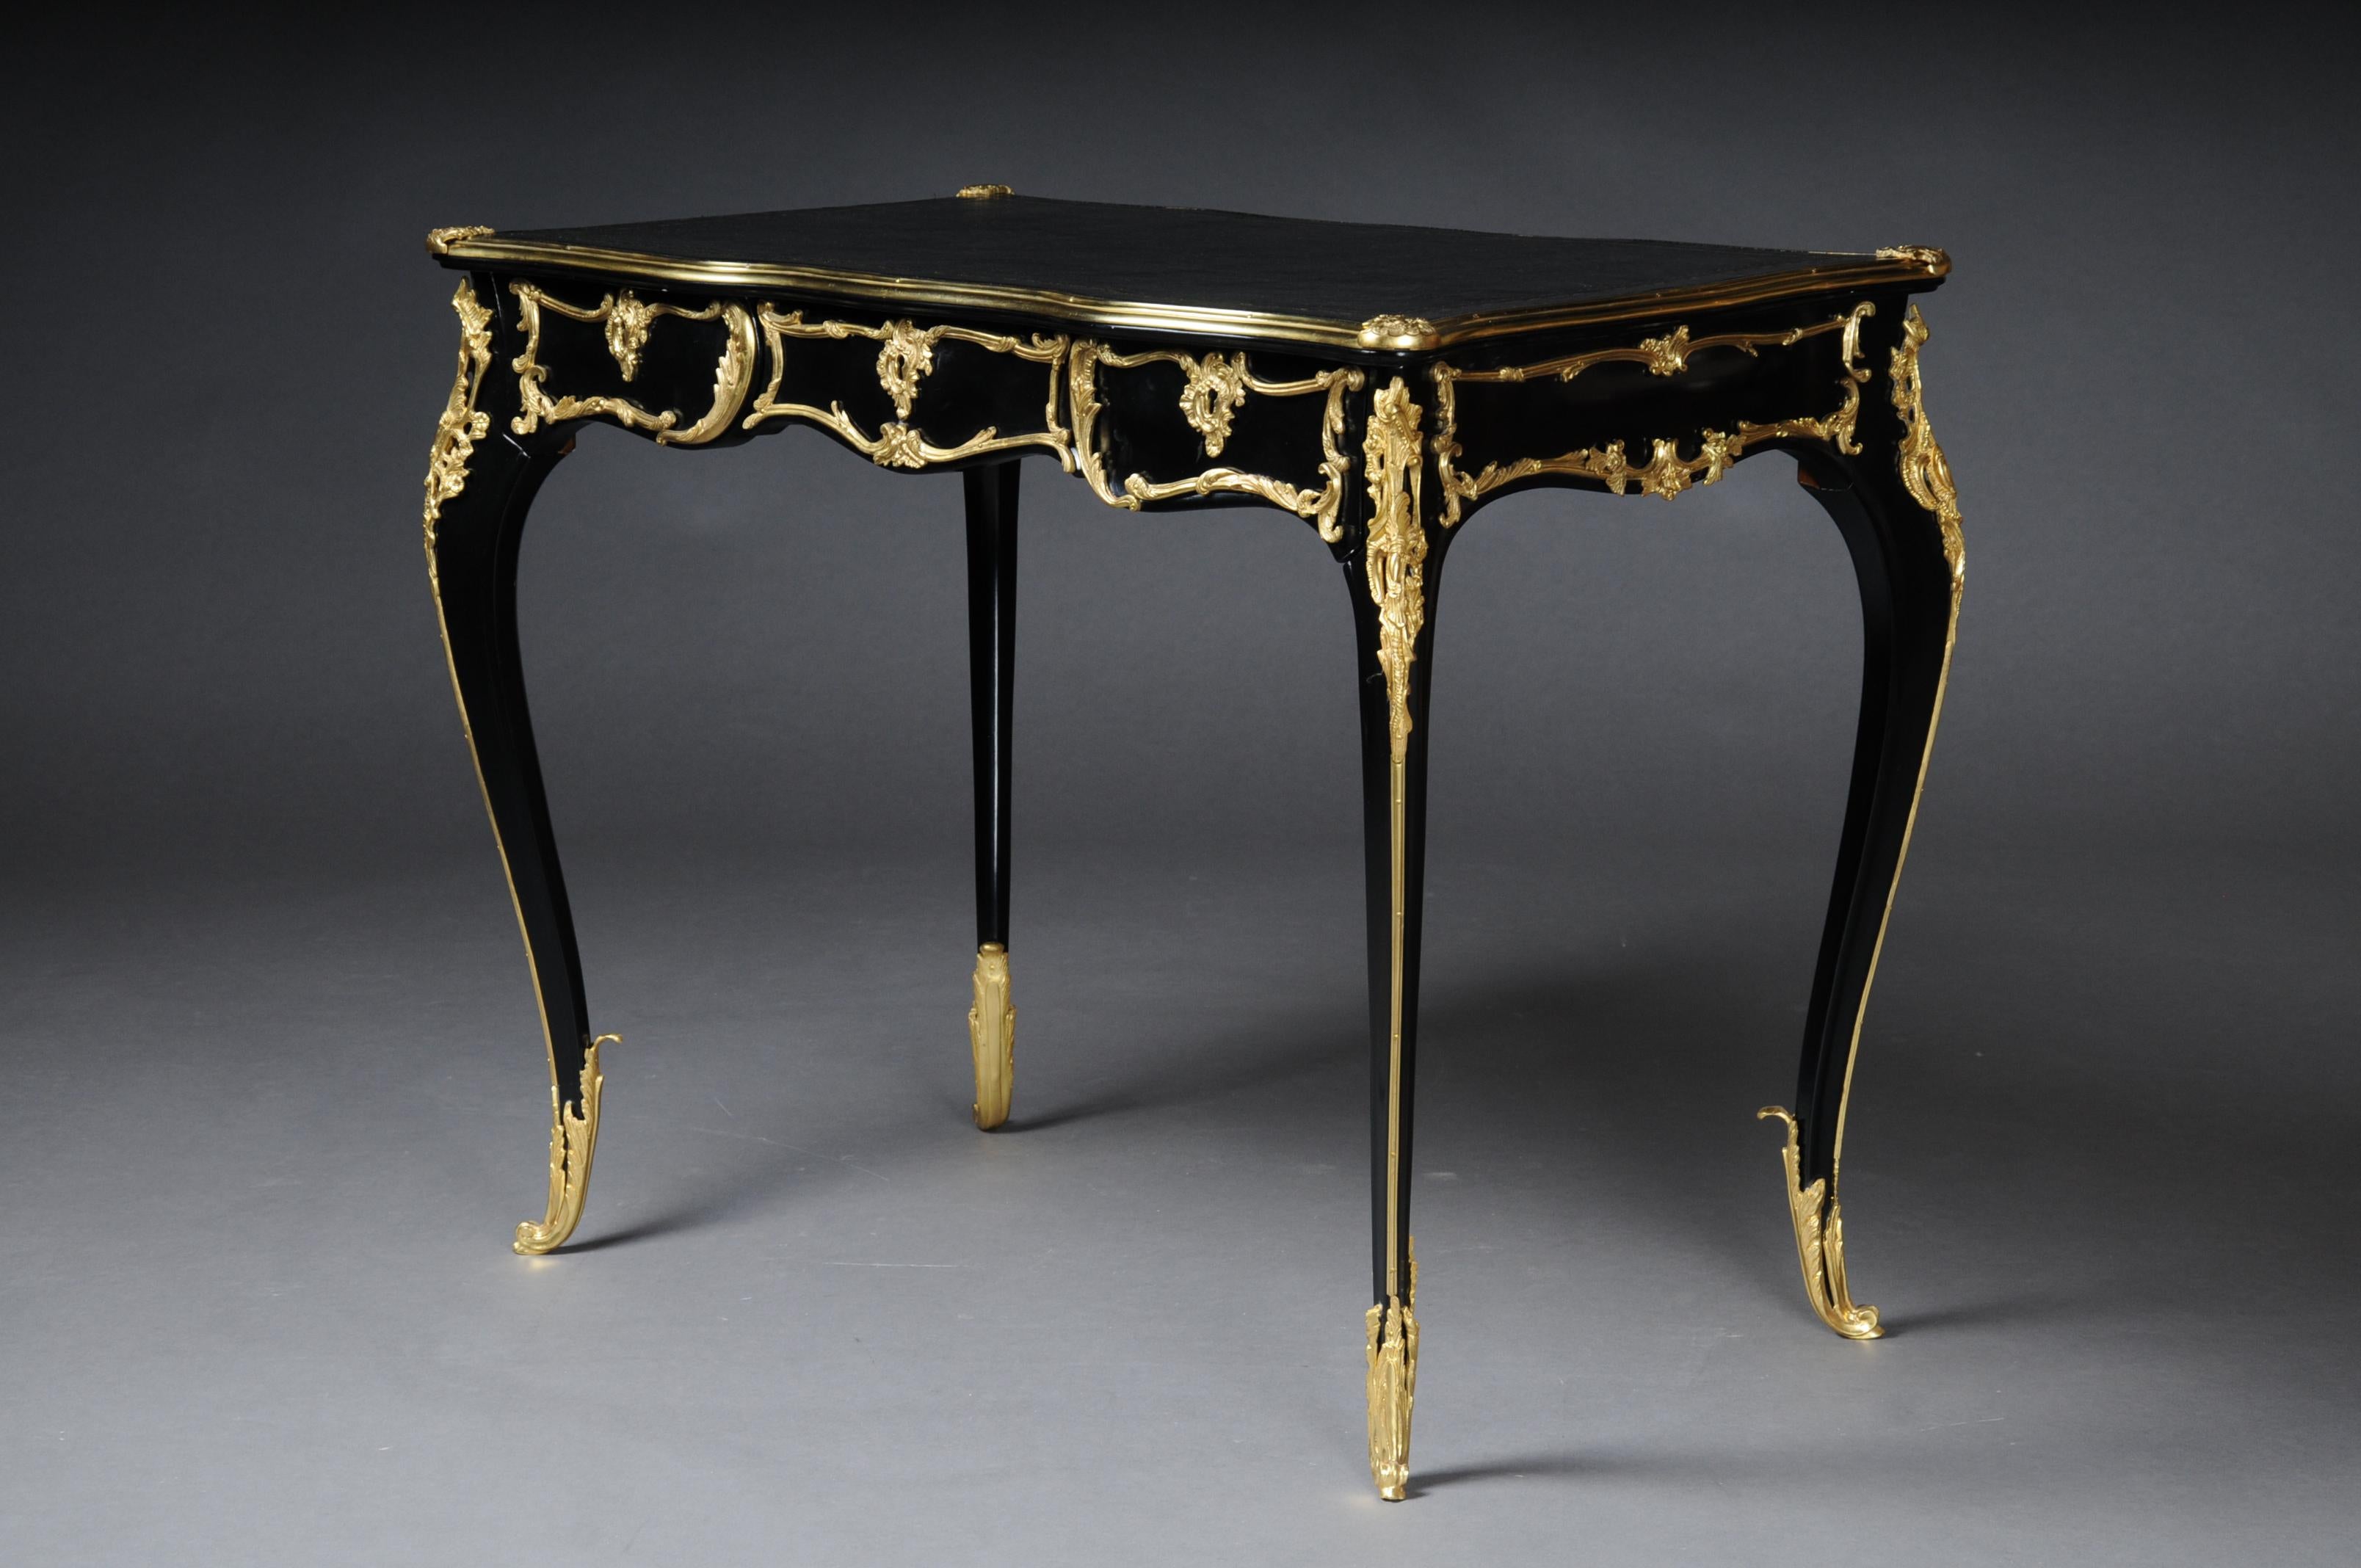 20th century elegant black bureau plat / writing desk in Louis XV, beech

Exclusive bureau plat / desk in Louis XV style
Solid beechwood ebonized/blackened. Very fine, floral bronze fittings.
Curved and pronounced / arched wooden body. Frame